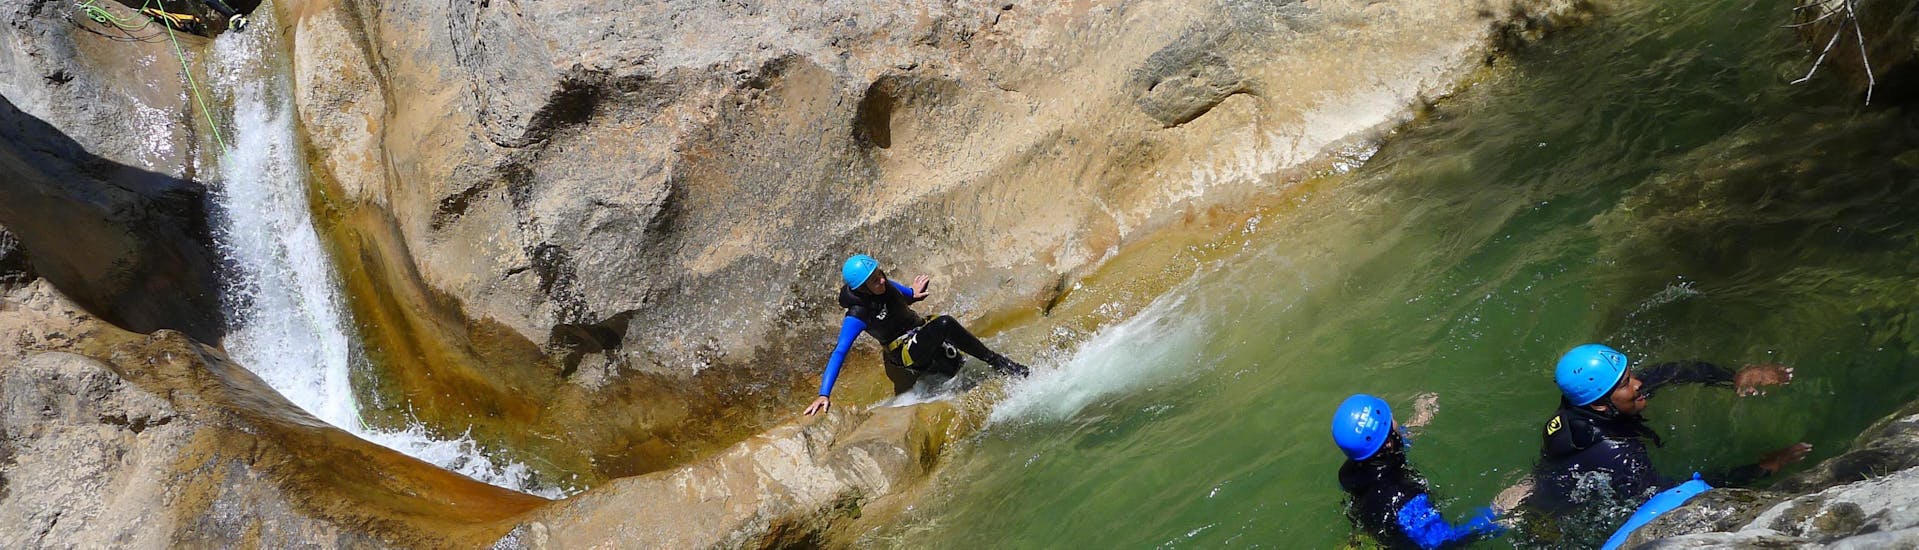 A girl is abseiling during the Canyoning in Viu de Llevata for a Full Day with H2O vives.